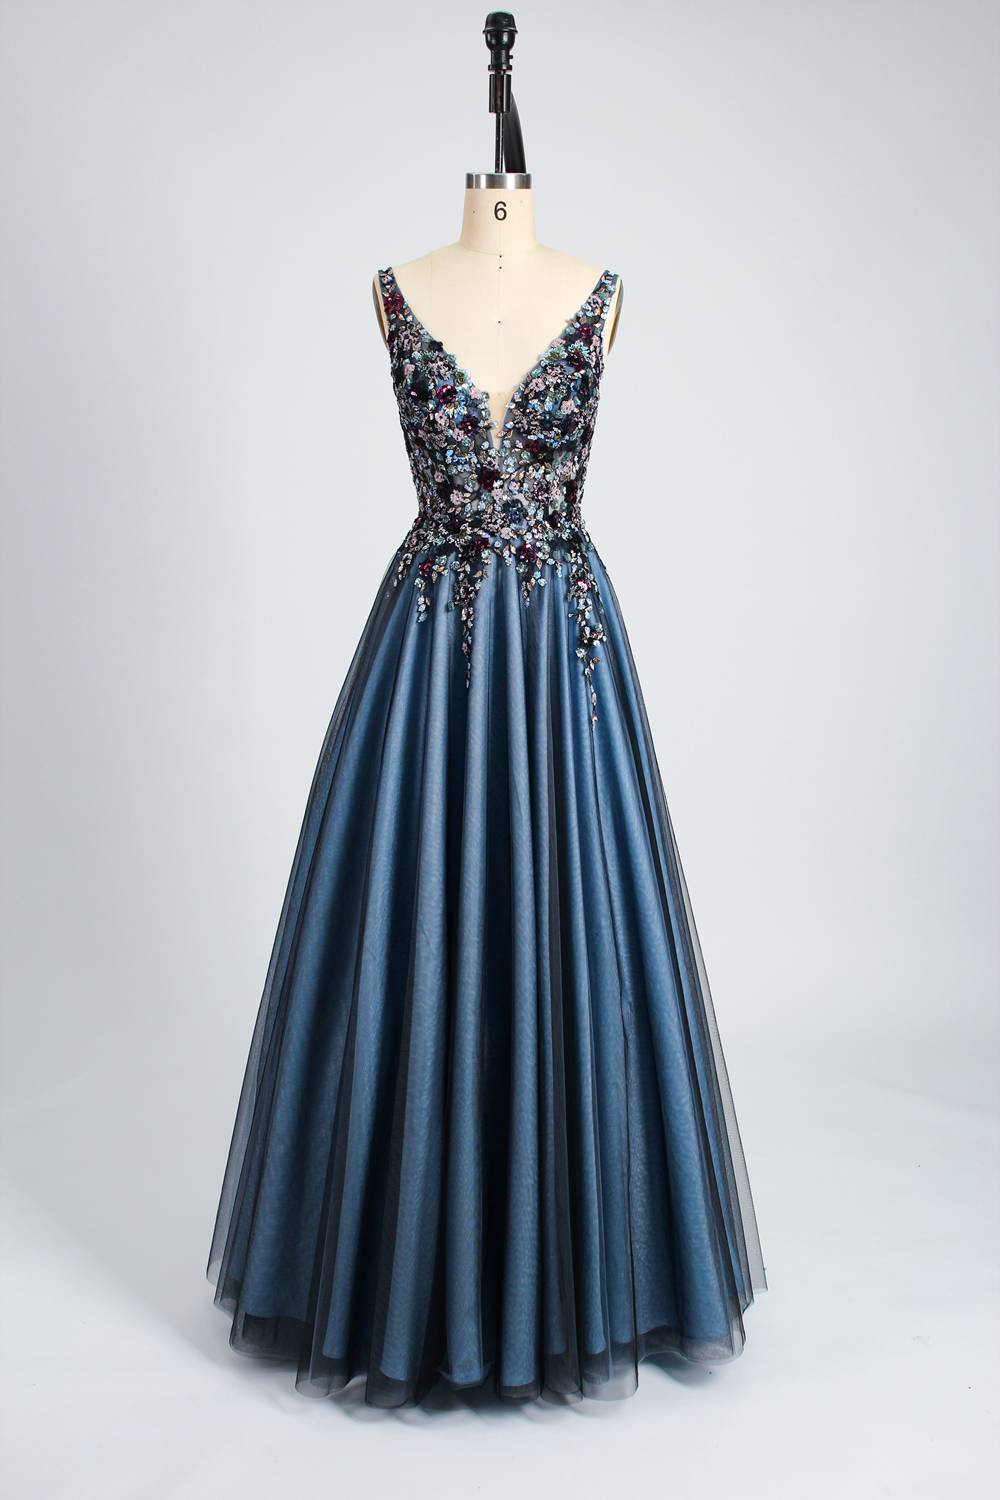 Multicolored Beaded Ball Gown for a Magical Prom Night 3320